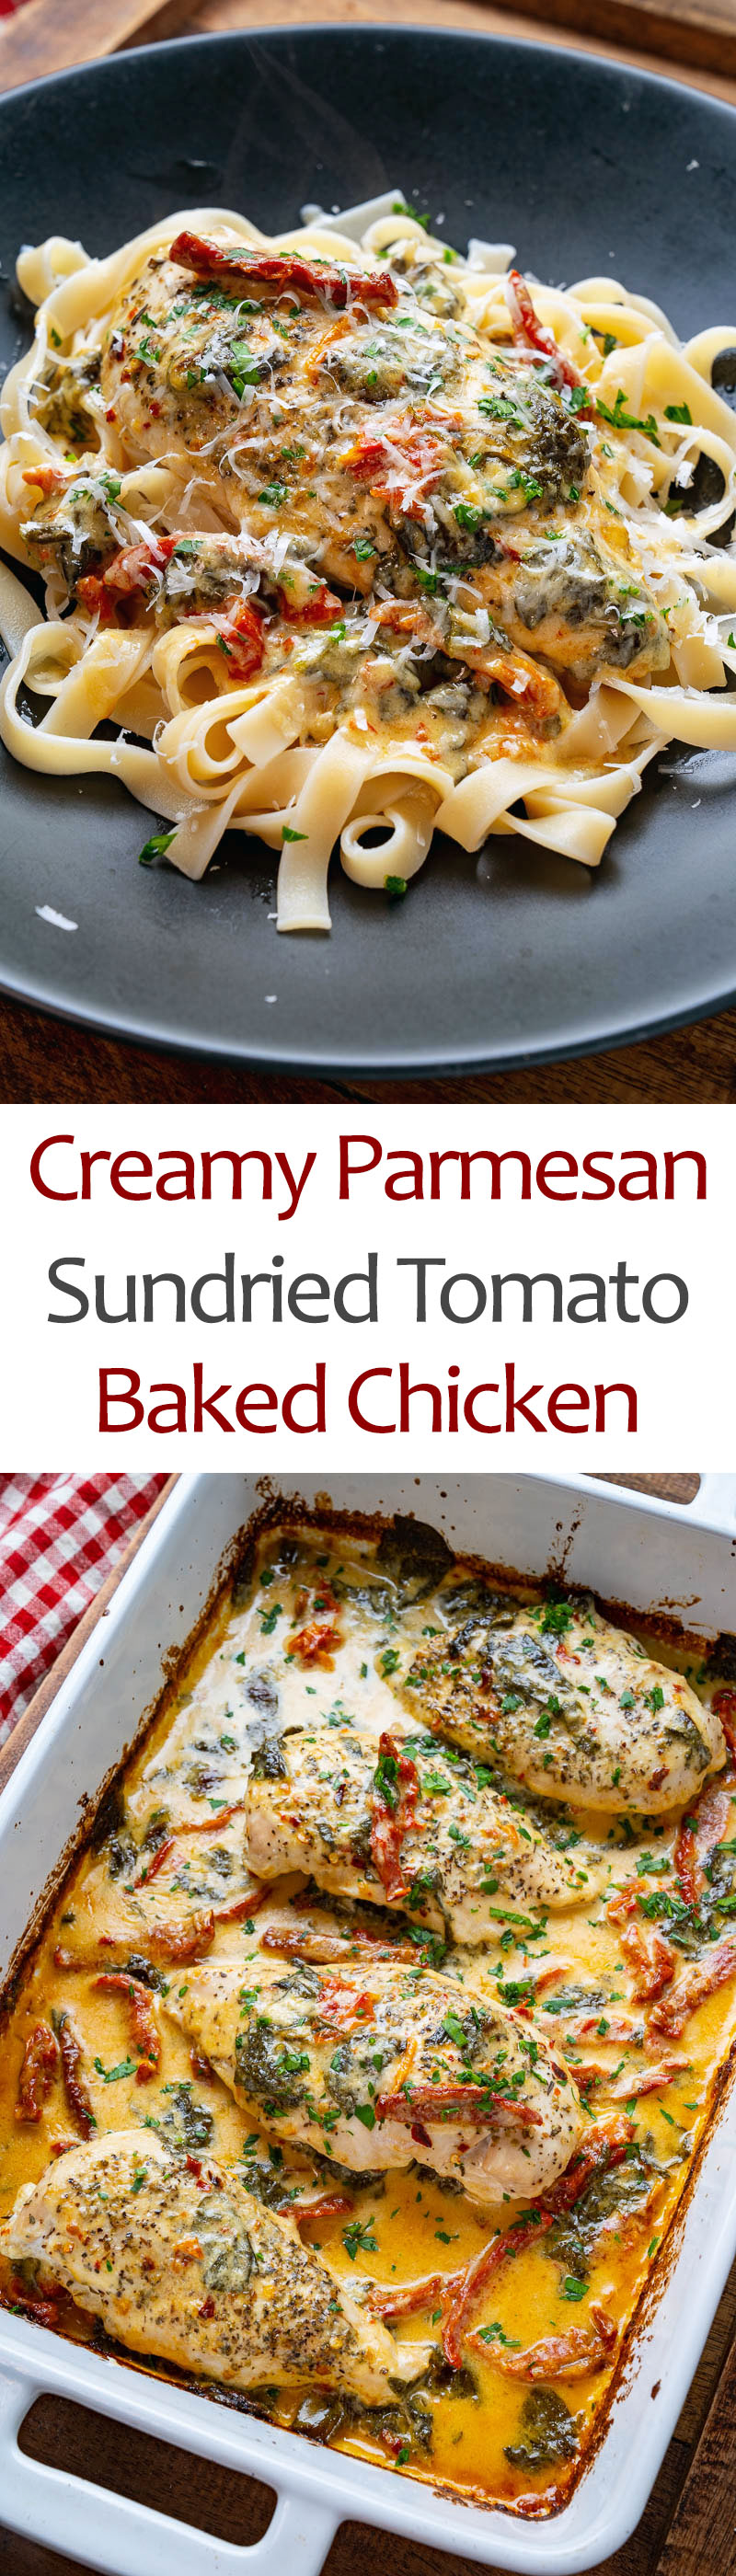 Creamy Parmesan and Sundried Tomato Baked Chicken